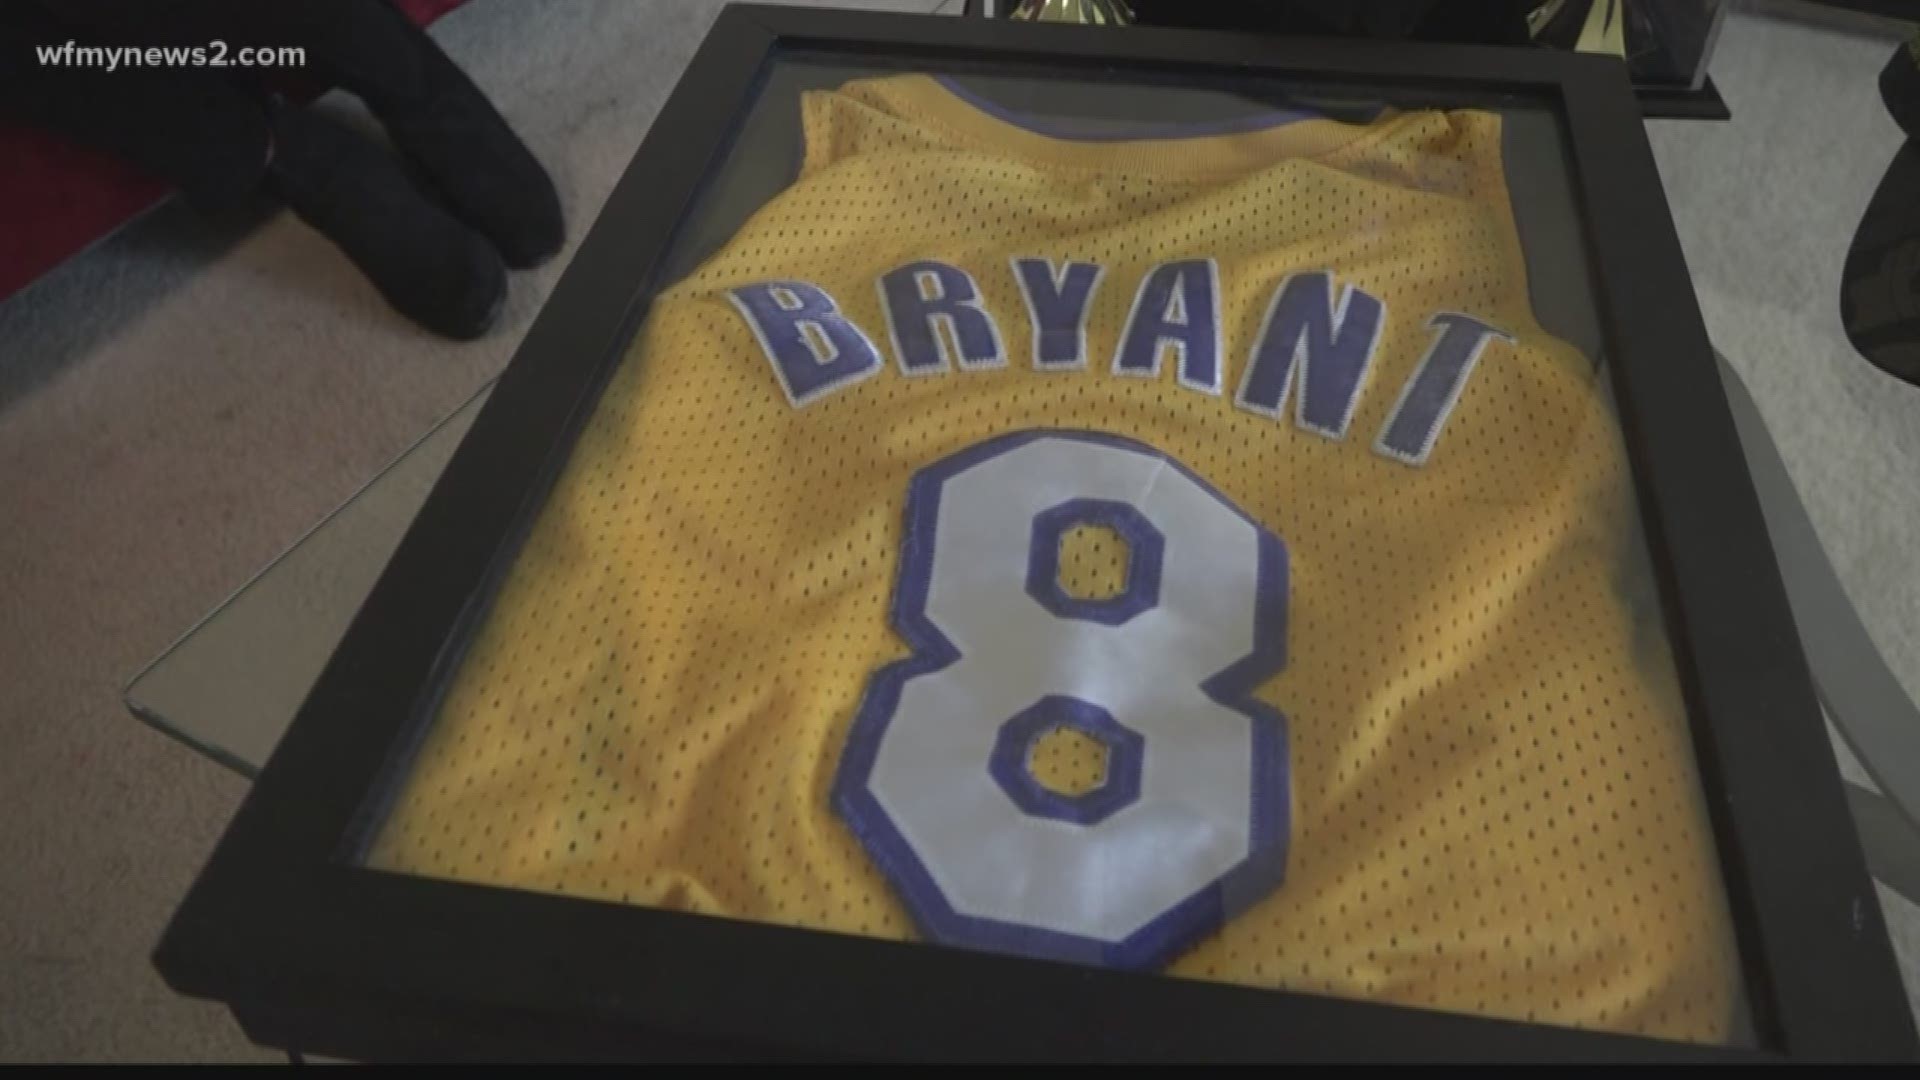 This Kobe superfan rented out a gym and had a Kobe Bryant themed birthday party for her son.